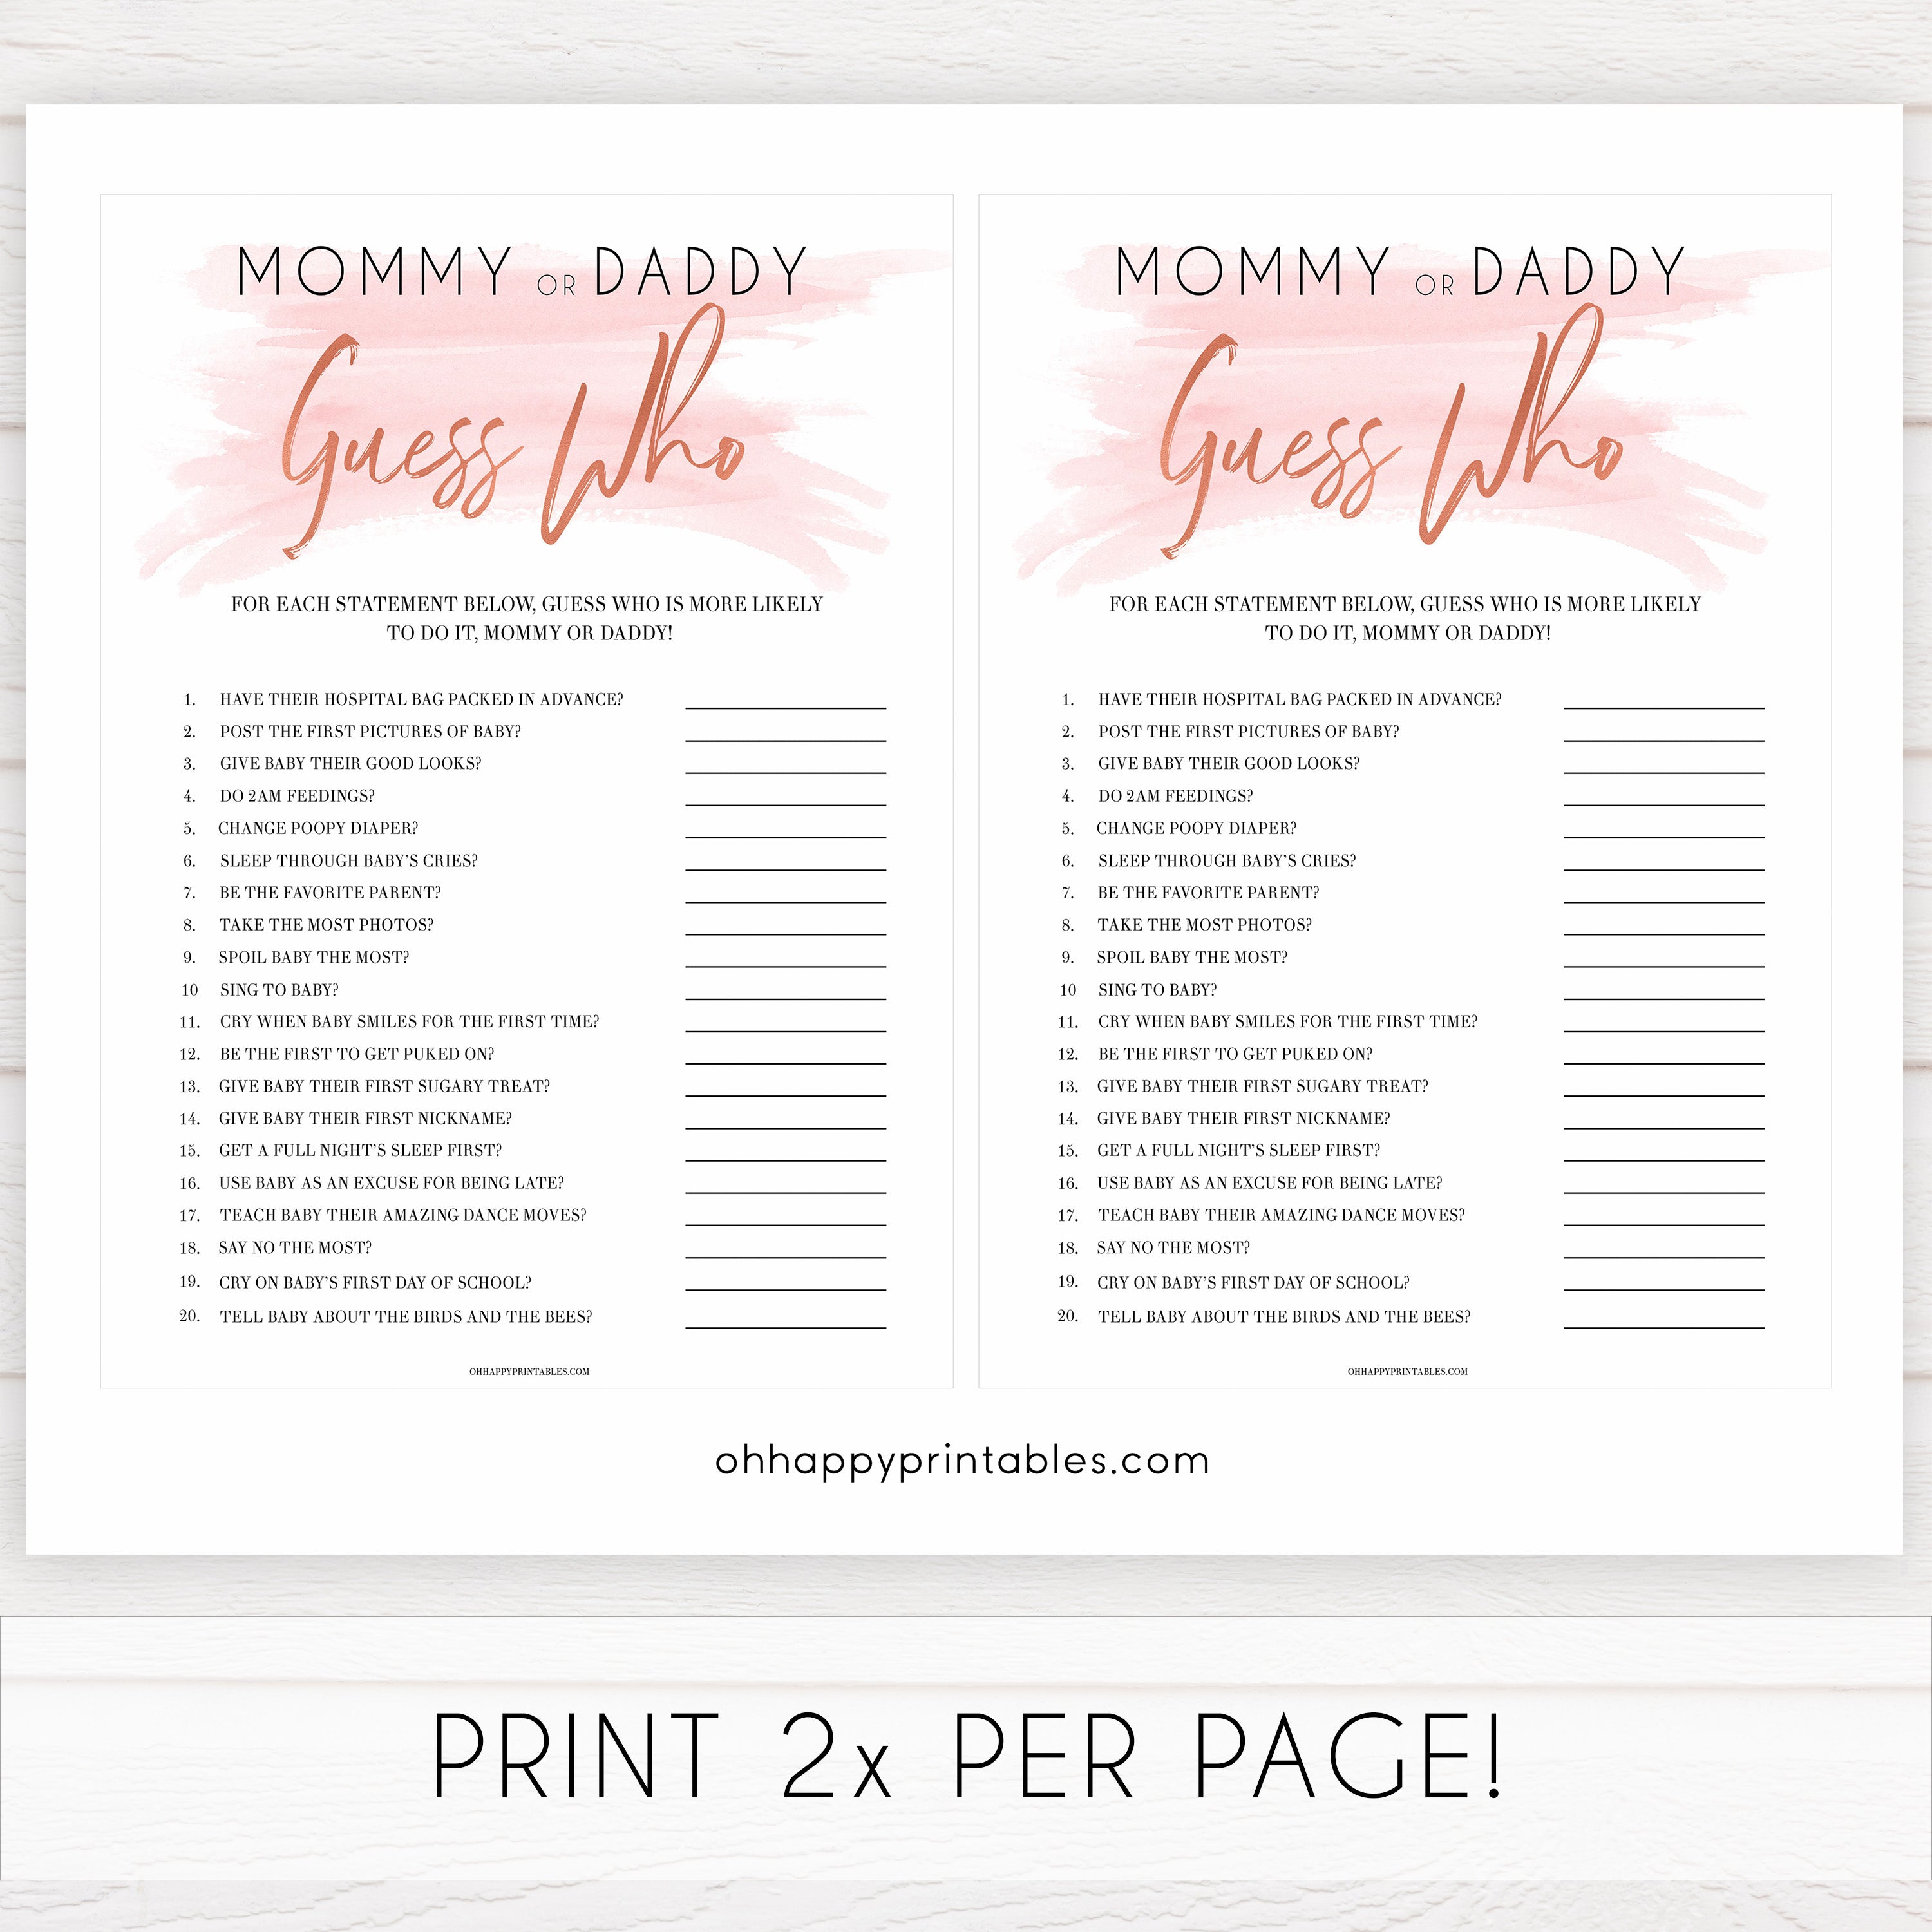 pink swash mommy or daddy guess who game, baby shower games, printable baby shower games, fun baby shower games, popular baby shower games